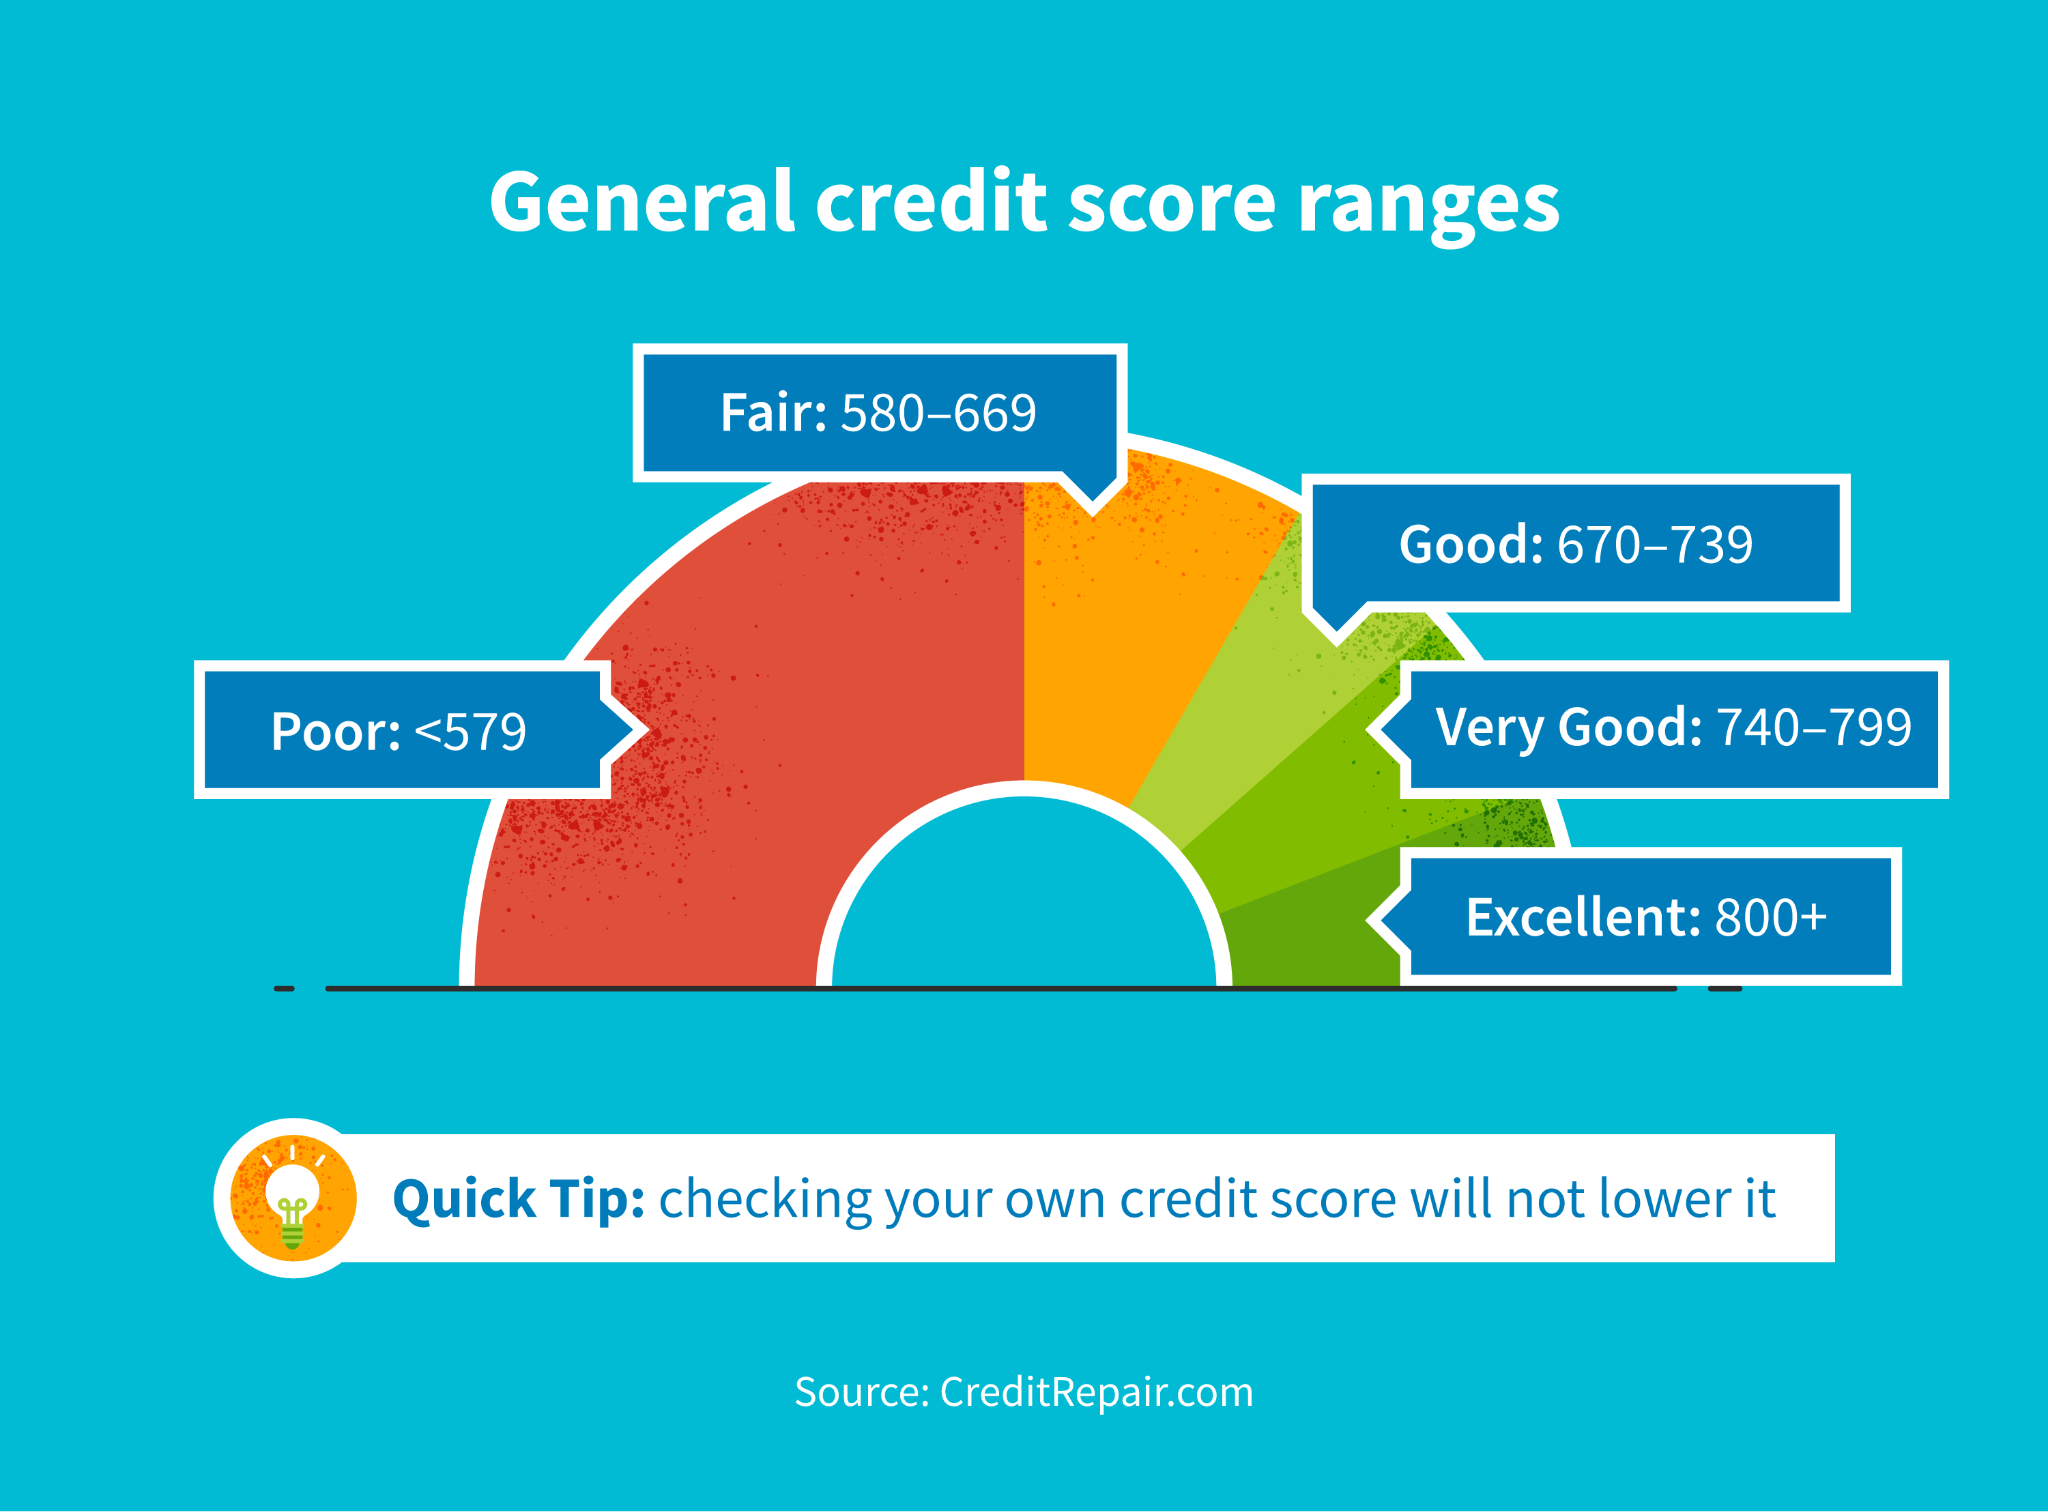 How to Check Your Credit Score | CreditRepair.com